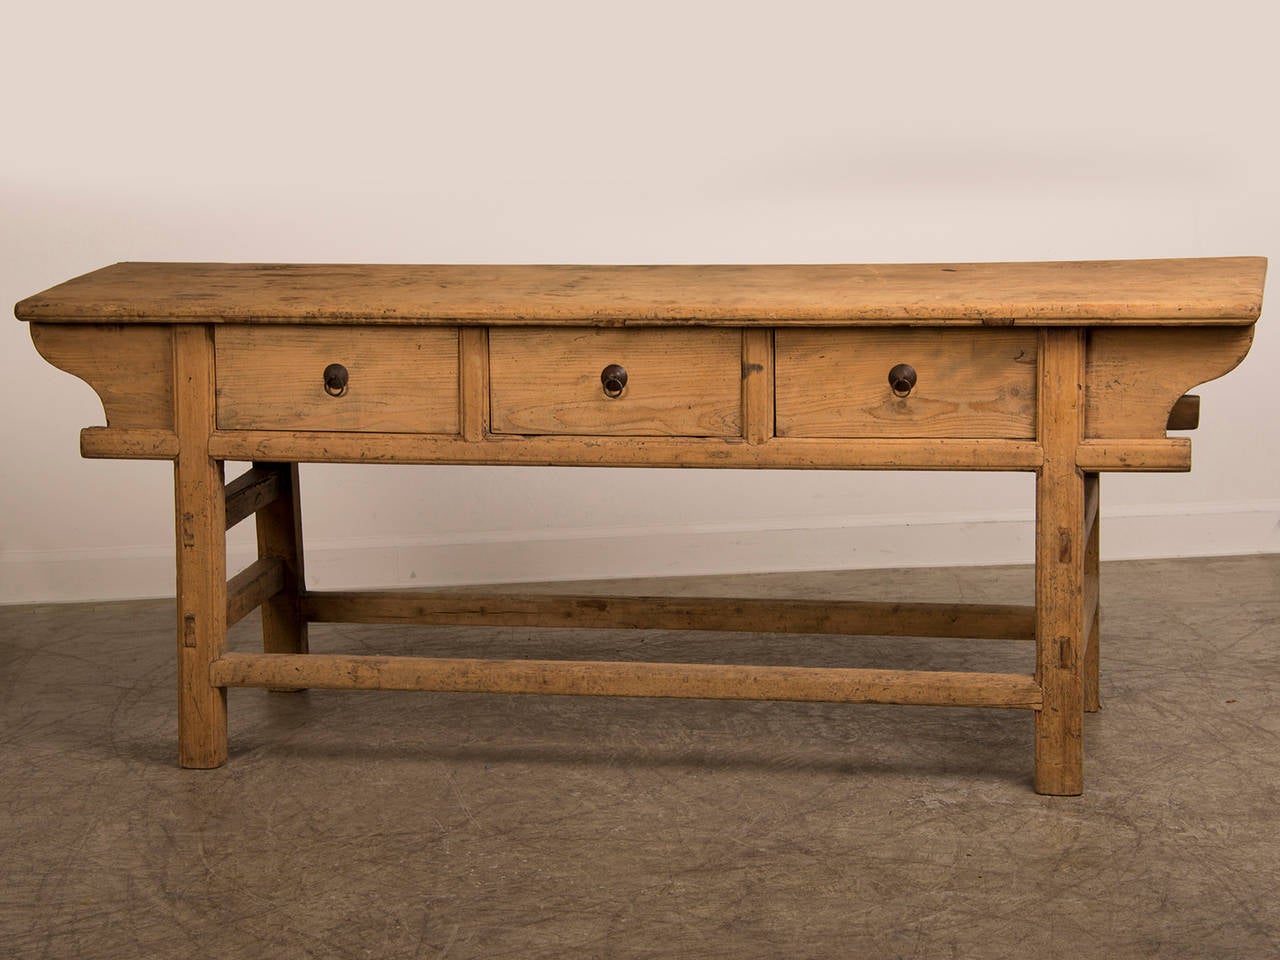 A striking bleached elm serving table from the Kuang Hsu period in China c. 1875. Please notice the architectural simplicity of this piece with the four vertical legs set at a slight slant. Each of the legs are joined by a series of horizontal